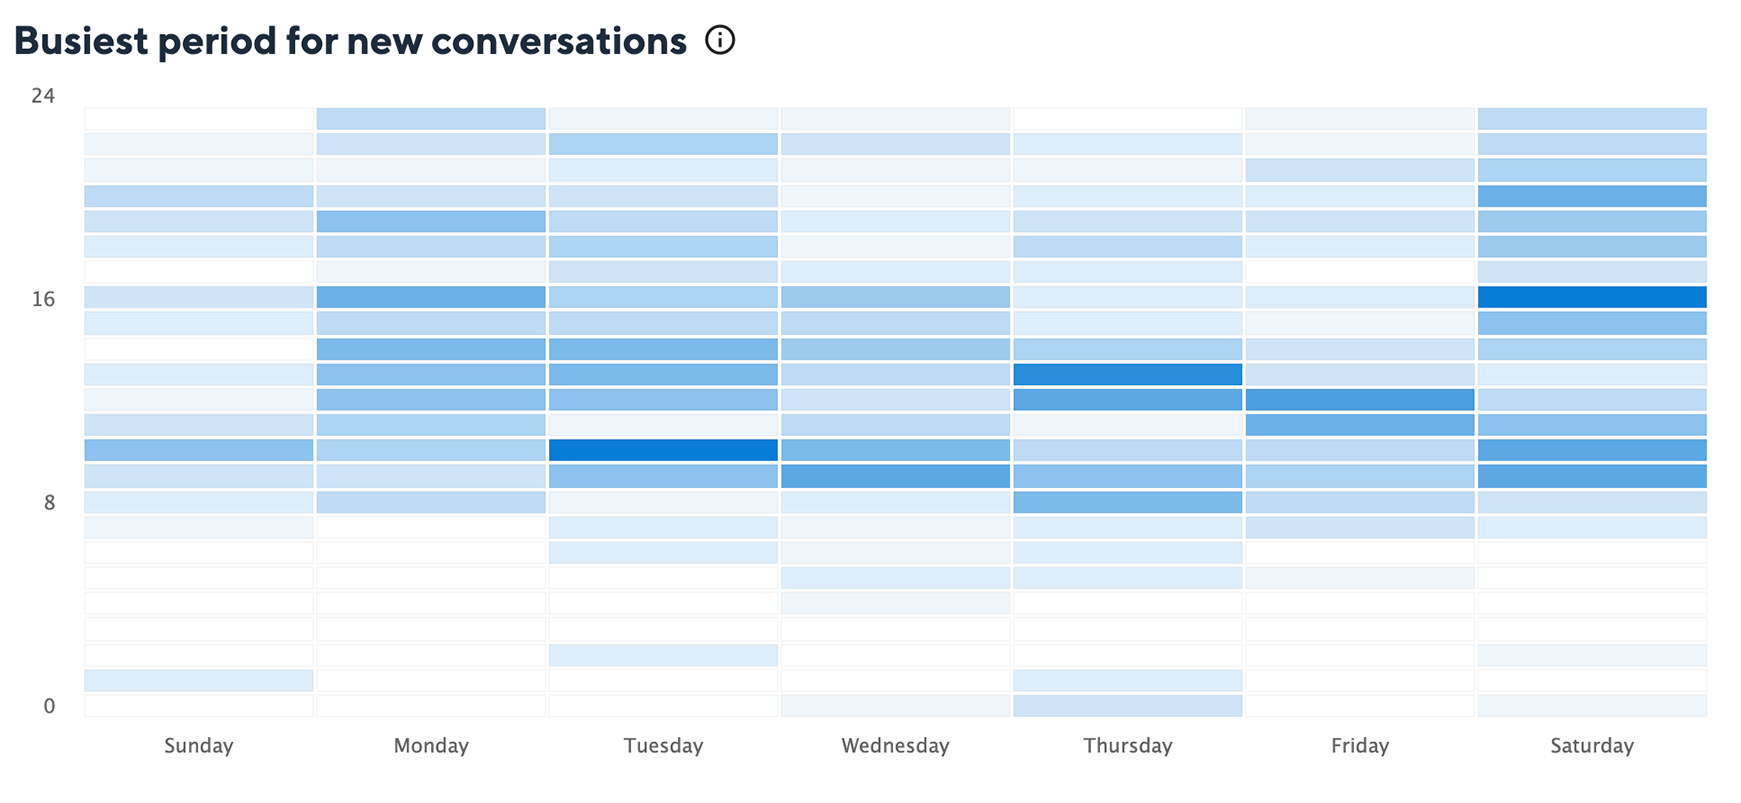 Busiest_Period_for_new_conversations.jpg